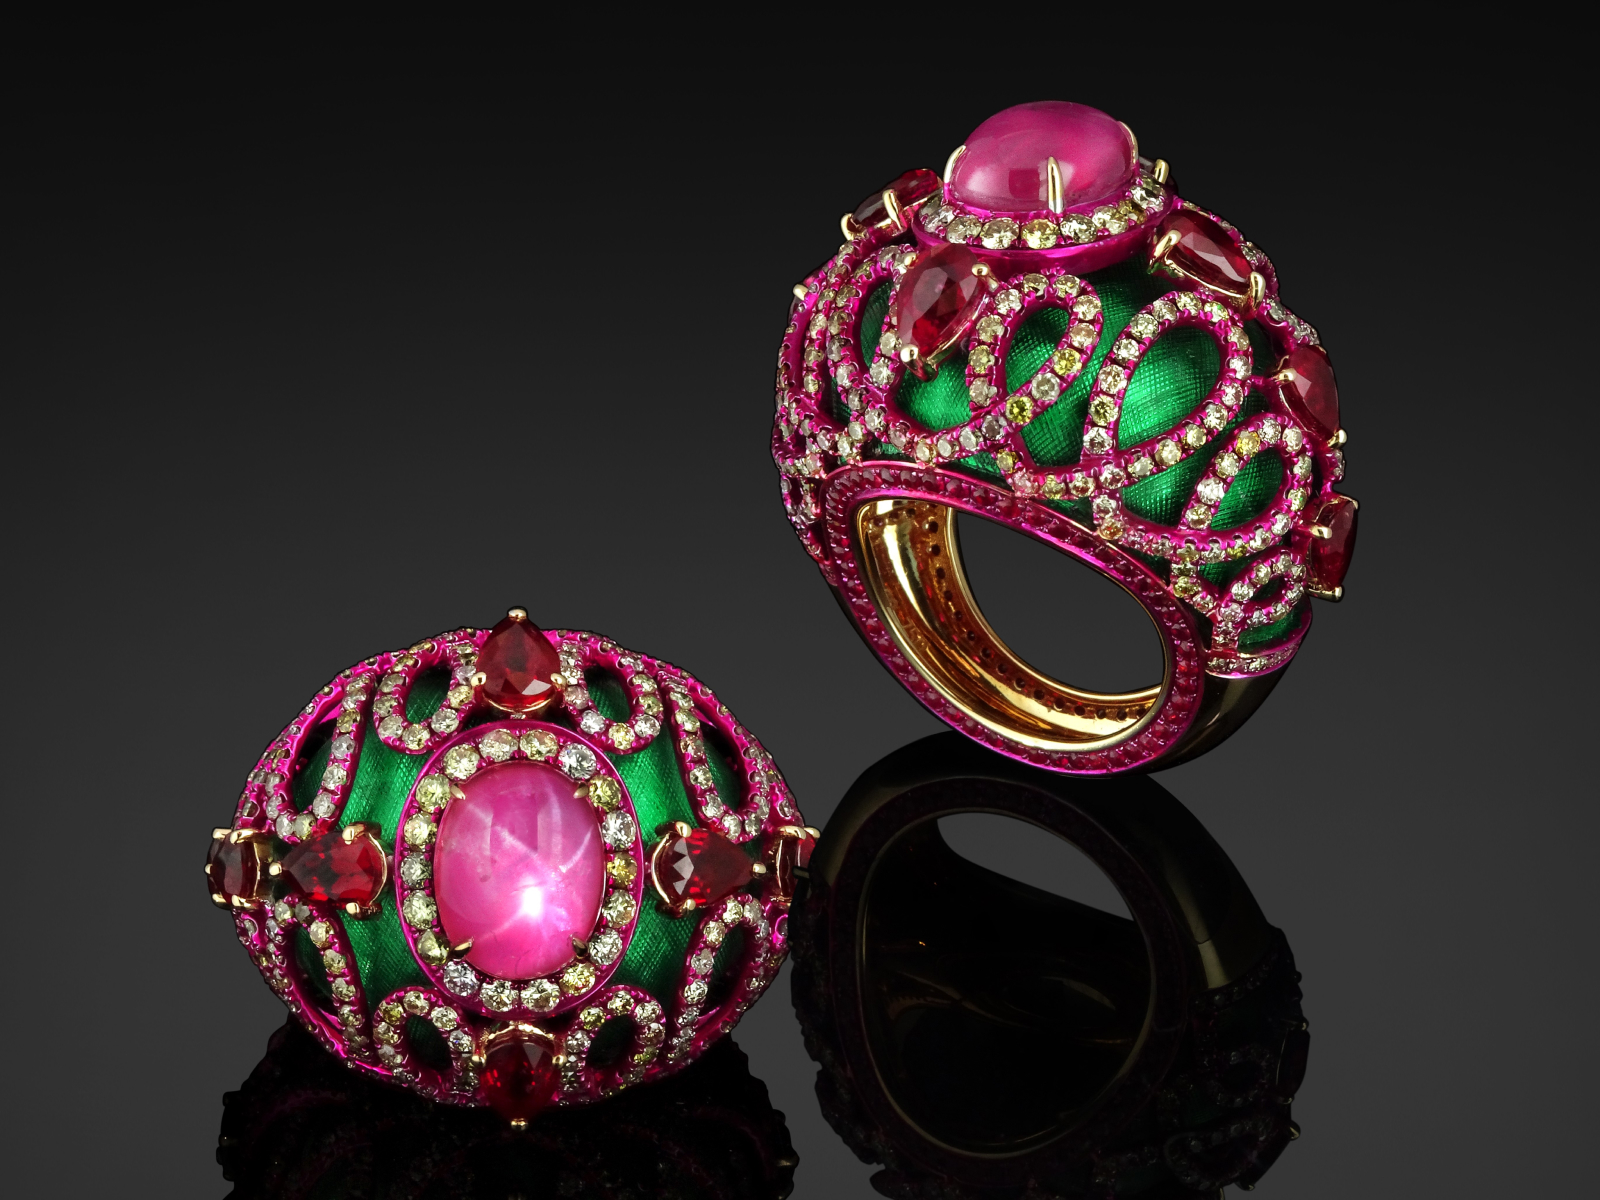 Austy Lee ‘The Greenish-Pinky Baroque Wool Ring’ in 18k rose gold with Burmese unheated star ruby, Mozambican unheated pigeon blood rubies and diamonds